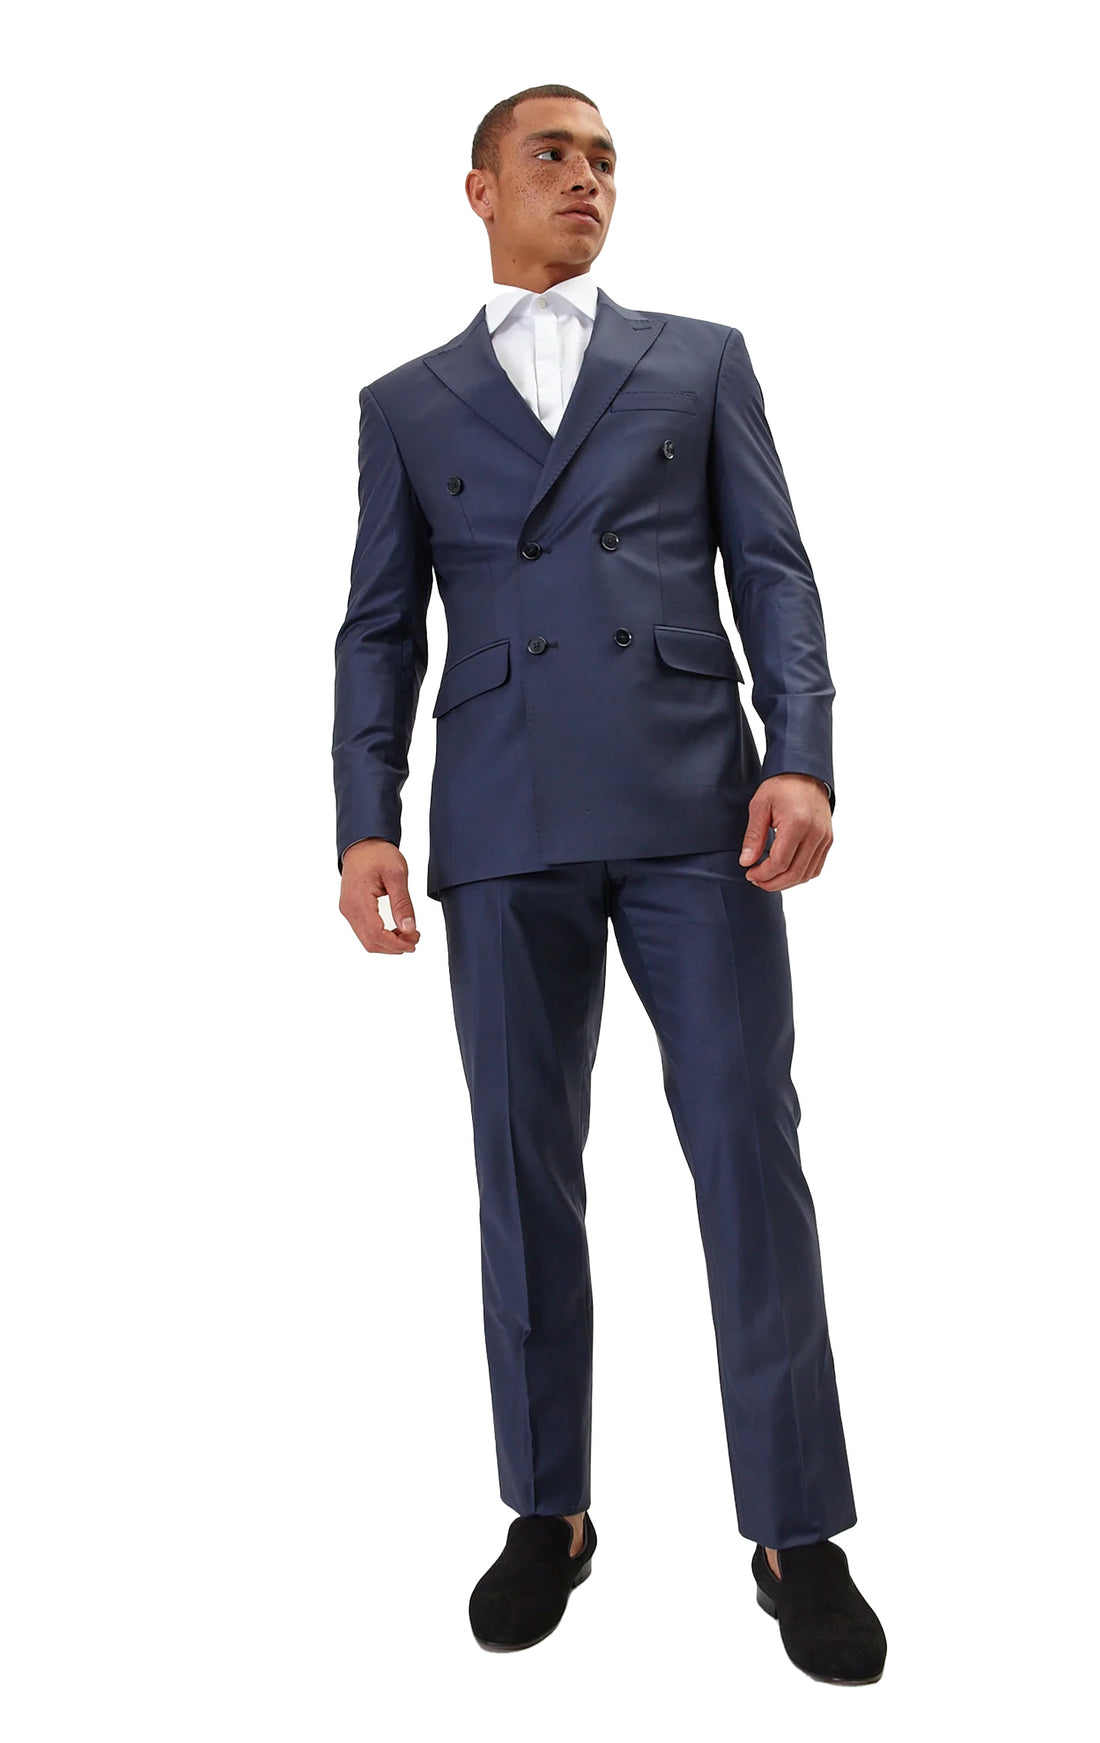 N° R206 SUPER 120S MERINO WOOL DOUBLE BREASTED SUIT - SOLID NAVY